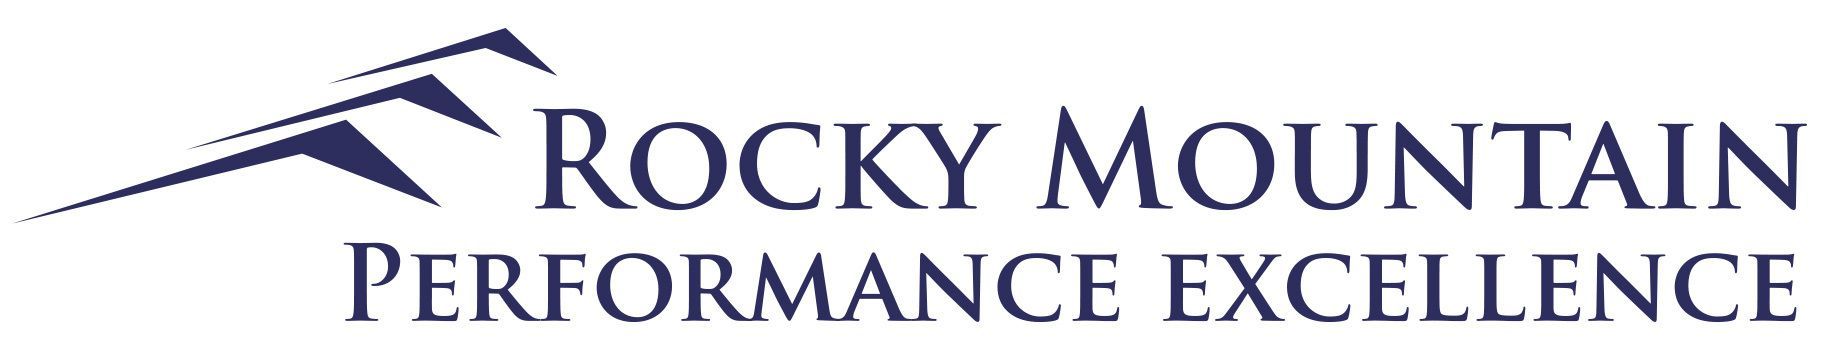 Rocky Mountain Performance Excellence